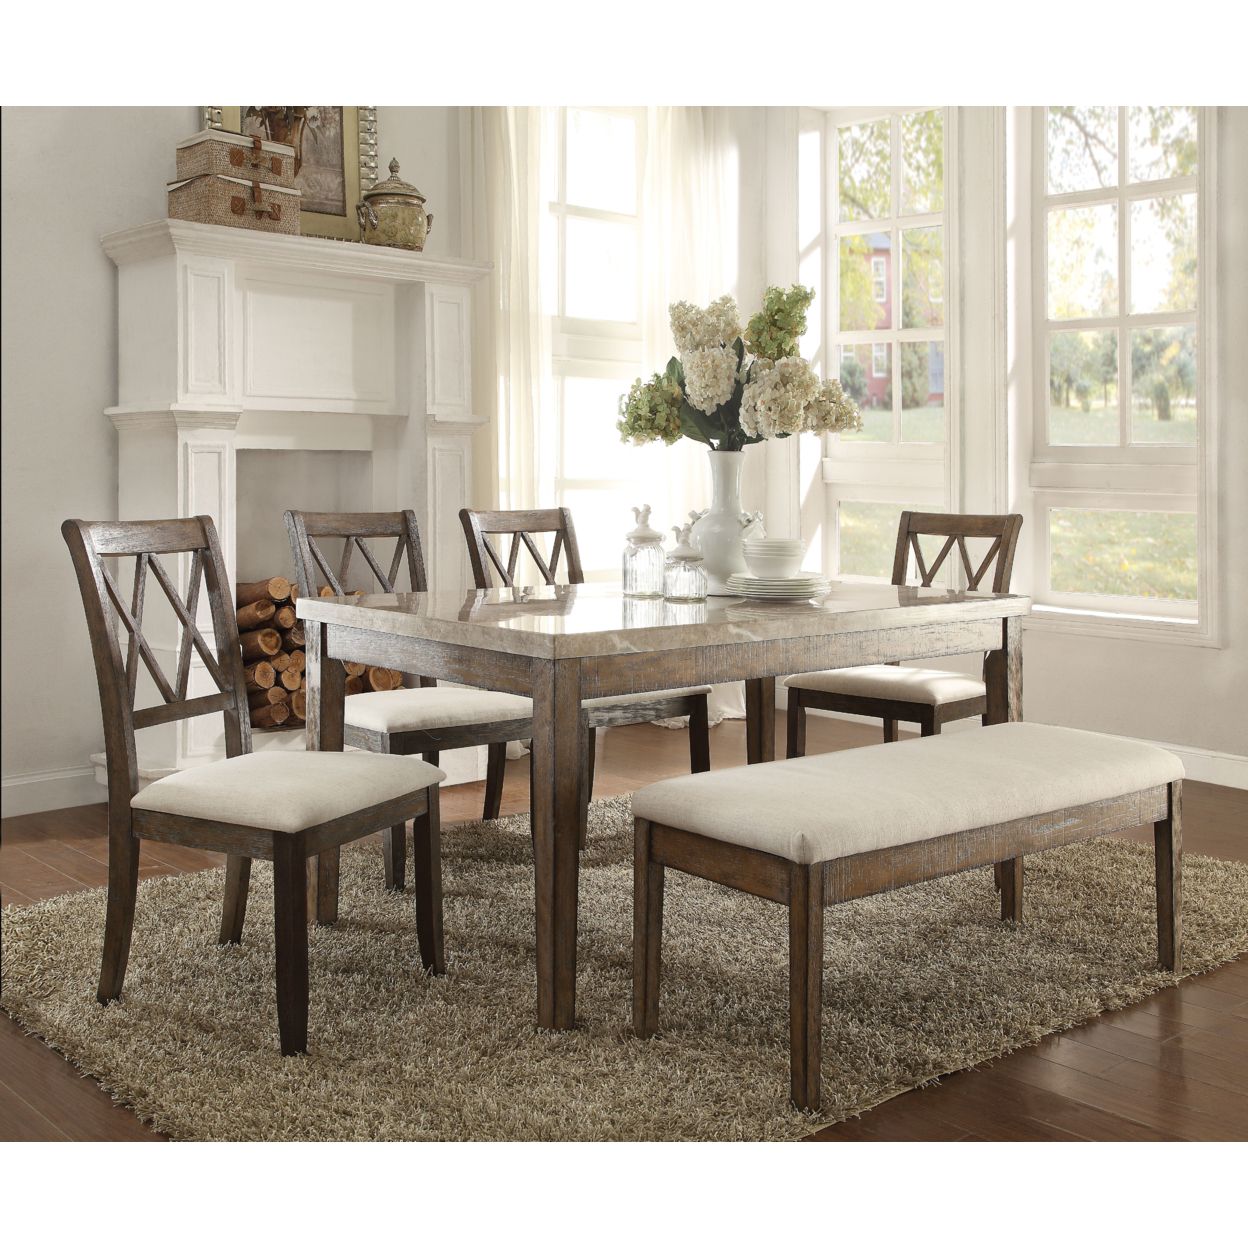 Amicable Dining Table With Marble Top, Brown And White In  Dining Tables From Furniture On Aliexpress (View 10 of 30)